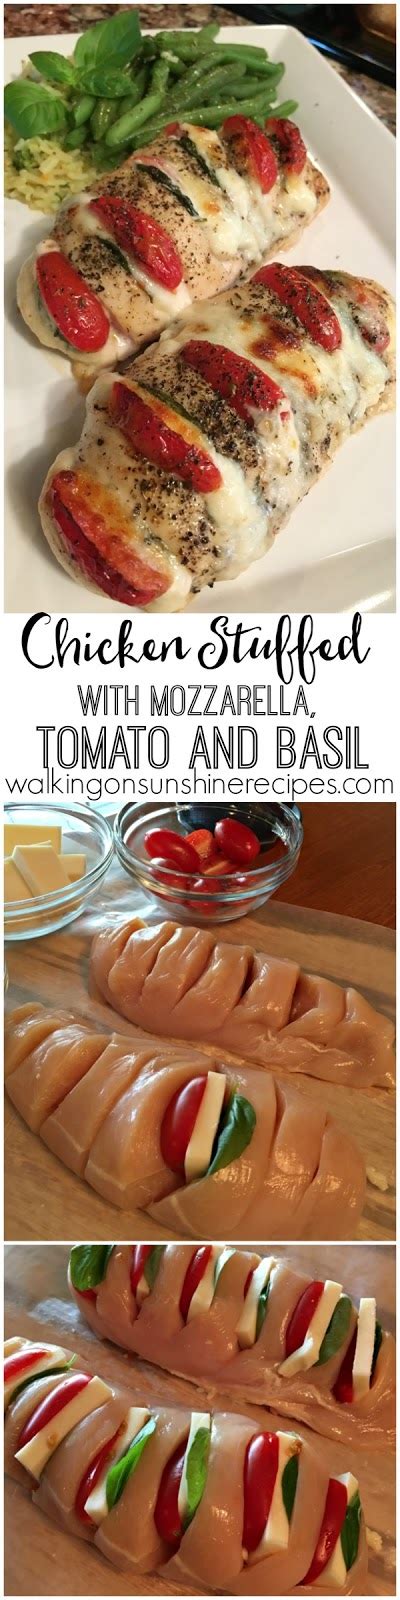 In a bowl, combine the basil, garlic, perfect italiano mozzarella and a sprinkle of salt and pepper. Hasselback Chicken Stuffed with Mozzarella, Tomato and ...